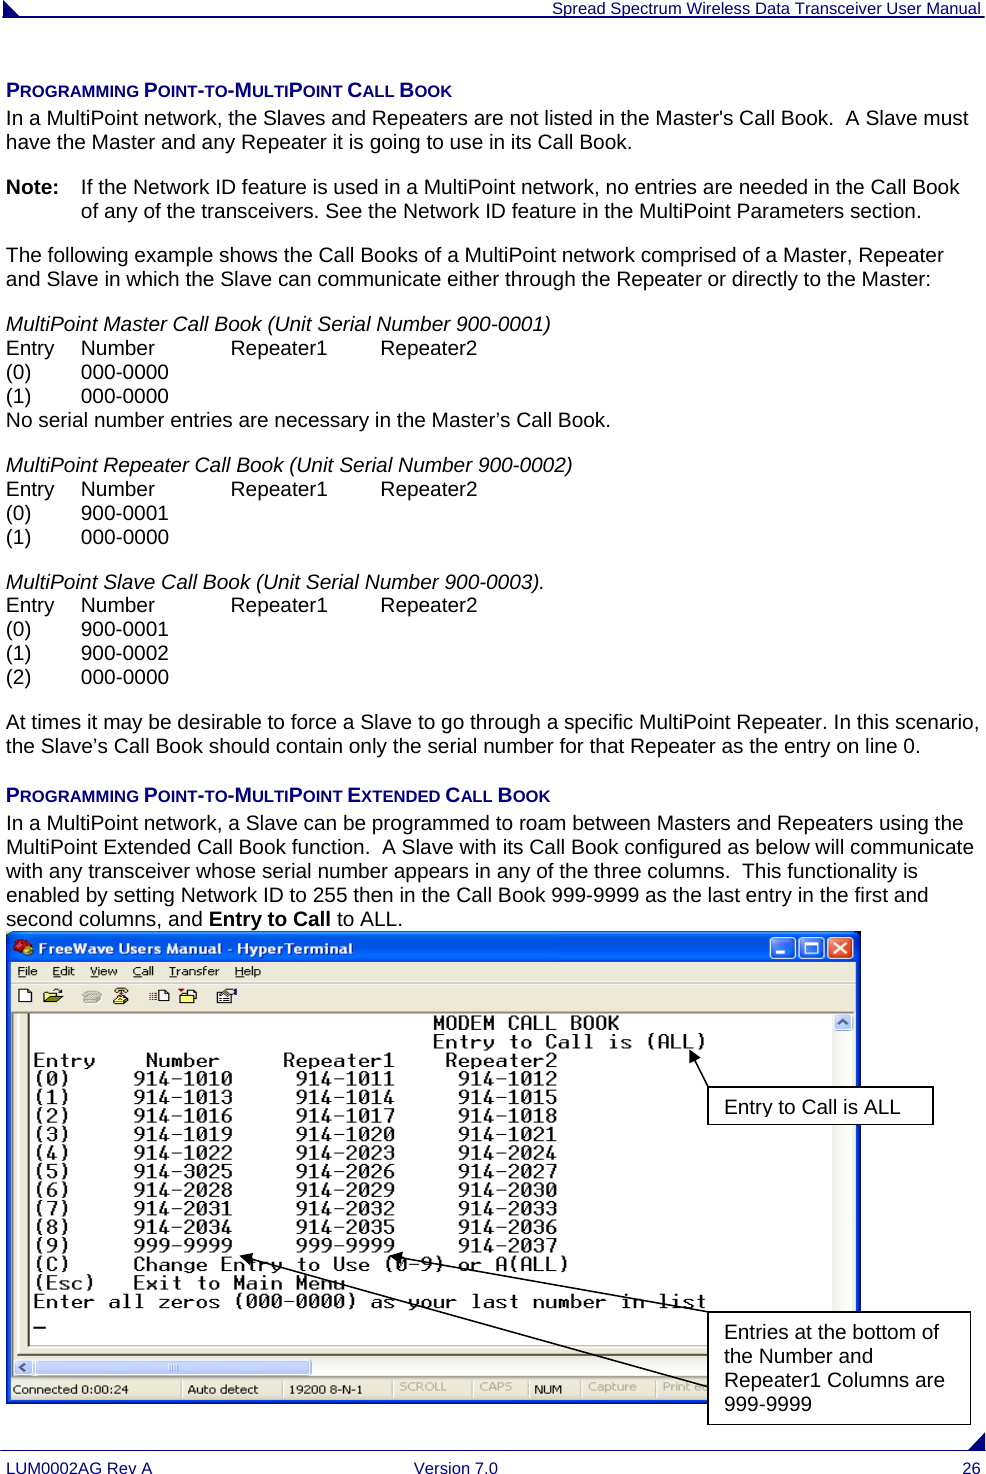  Spread Spectrum Wireless Data Transceiver User Manual LUM0002AG Rev A  Version 7.0  26 PROGRAMMING POINT-TO-MULTIPOINT CALL BOOK  In a MultiPoint network, the Slaves and Repeaters are not listed in the Master&apos;s Call Book.  A Slave must have the Master and any Repeater it is going to use in its Call Book.   Note:   If the Network ID feature is used in a MultiPoint network, no entries are needed in the Call Book of any of the transceivers. See the Network ID feature in the MultiPoint Parameters section. The following example shows the Call Books of a MultiPoint network comprised of a Master, Repeater and Slave in which the Slave can communicate either through the Repeater or directly to the Master: MultiPoint Master Call Book (Unit Serial Number 900-0001)                                                                   Entry   Number   Repeater1   Repeater2                                                                                          (0)  000-0000                                                                                                                                        (1)   000-0000                                                                                                                                        No serial number entries are necessary in the Master’s Call Book.  MultiPoint Repeater Call Book (Unit Serial Number 900-0002)                                                                       Entry   Number   Repeater1   Repeater2                                                                                   (0)   900-0001                                                                                                                                        (1)   000-0000 MultiPoint Slave Call Book (Unit Serial Number 900-0003).                                                                     Entry   Number   Repeater1   Repeater2                                                                                   (0)   900-0001                                                                                                                                         (1)   900-0002                                                                                                                                        (2)   000-0000 At times it may be desirable to force a Slave to go through a specific MultiPoint Repeater. In this scenario, the Slave’s Call Book should contain only the serial number for that Repeater as the entry on line 0. PROGRAMMING POINT-TO-MULTIPOINT EXTENDED CALL BOOK In a MultiPoint network, a Slave can be programmed to roam between Masters and Repeaters using the MultiPoint Extended Call Book function.  A Slave with its Call Book configured as below will communicate with any transceiver whose serial number appears in any of the three columns.  This functionality is enabled by setting Network ID to 255 then in the Call Book 999-9999 as the last entry in the first and second columns, and Entry to Call to ALL.  Entry to Call is ALLEntries at the bottom of the Number and Repeater1 Columns are 999-9999 